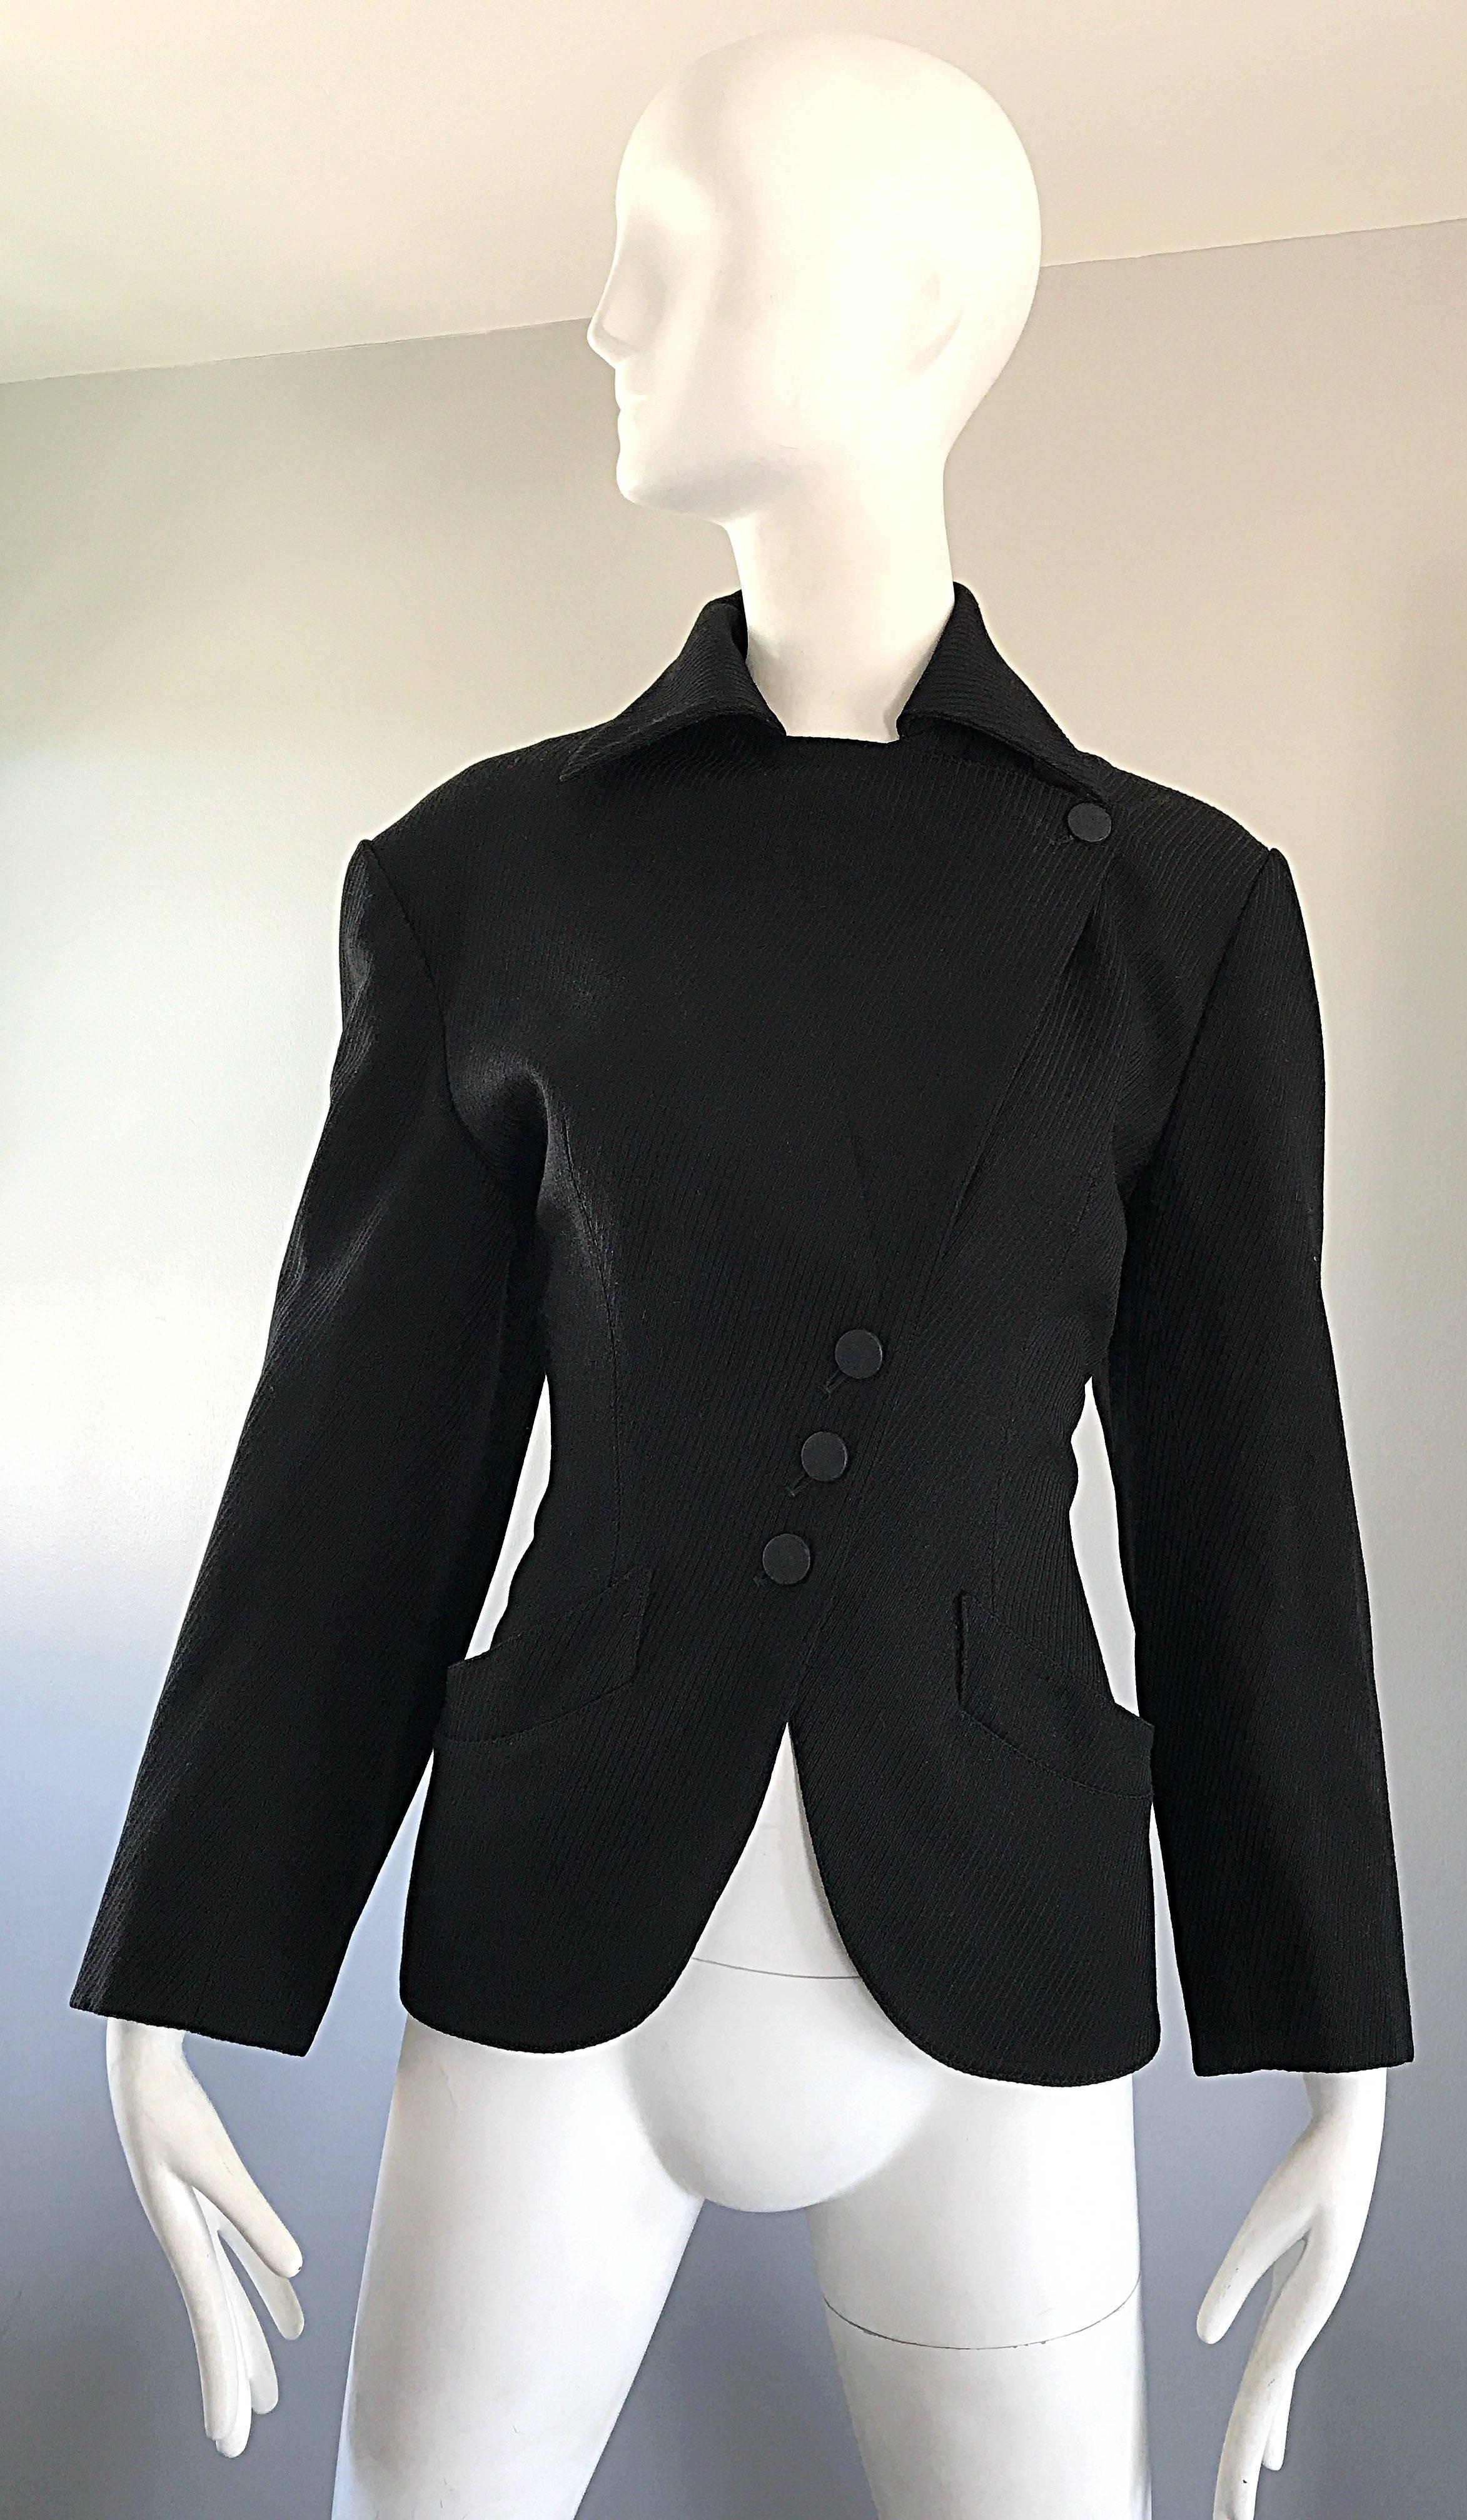 Amazing and rare musuem held AZZEDINE ALAIA mid 1980s black corset style Avant Garde jacket! Versions of this rare gem were featured in the Alaia exhibit at The Groningen Musuem, and the book, 